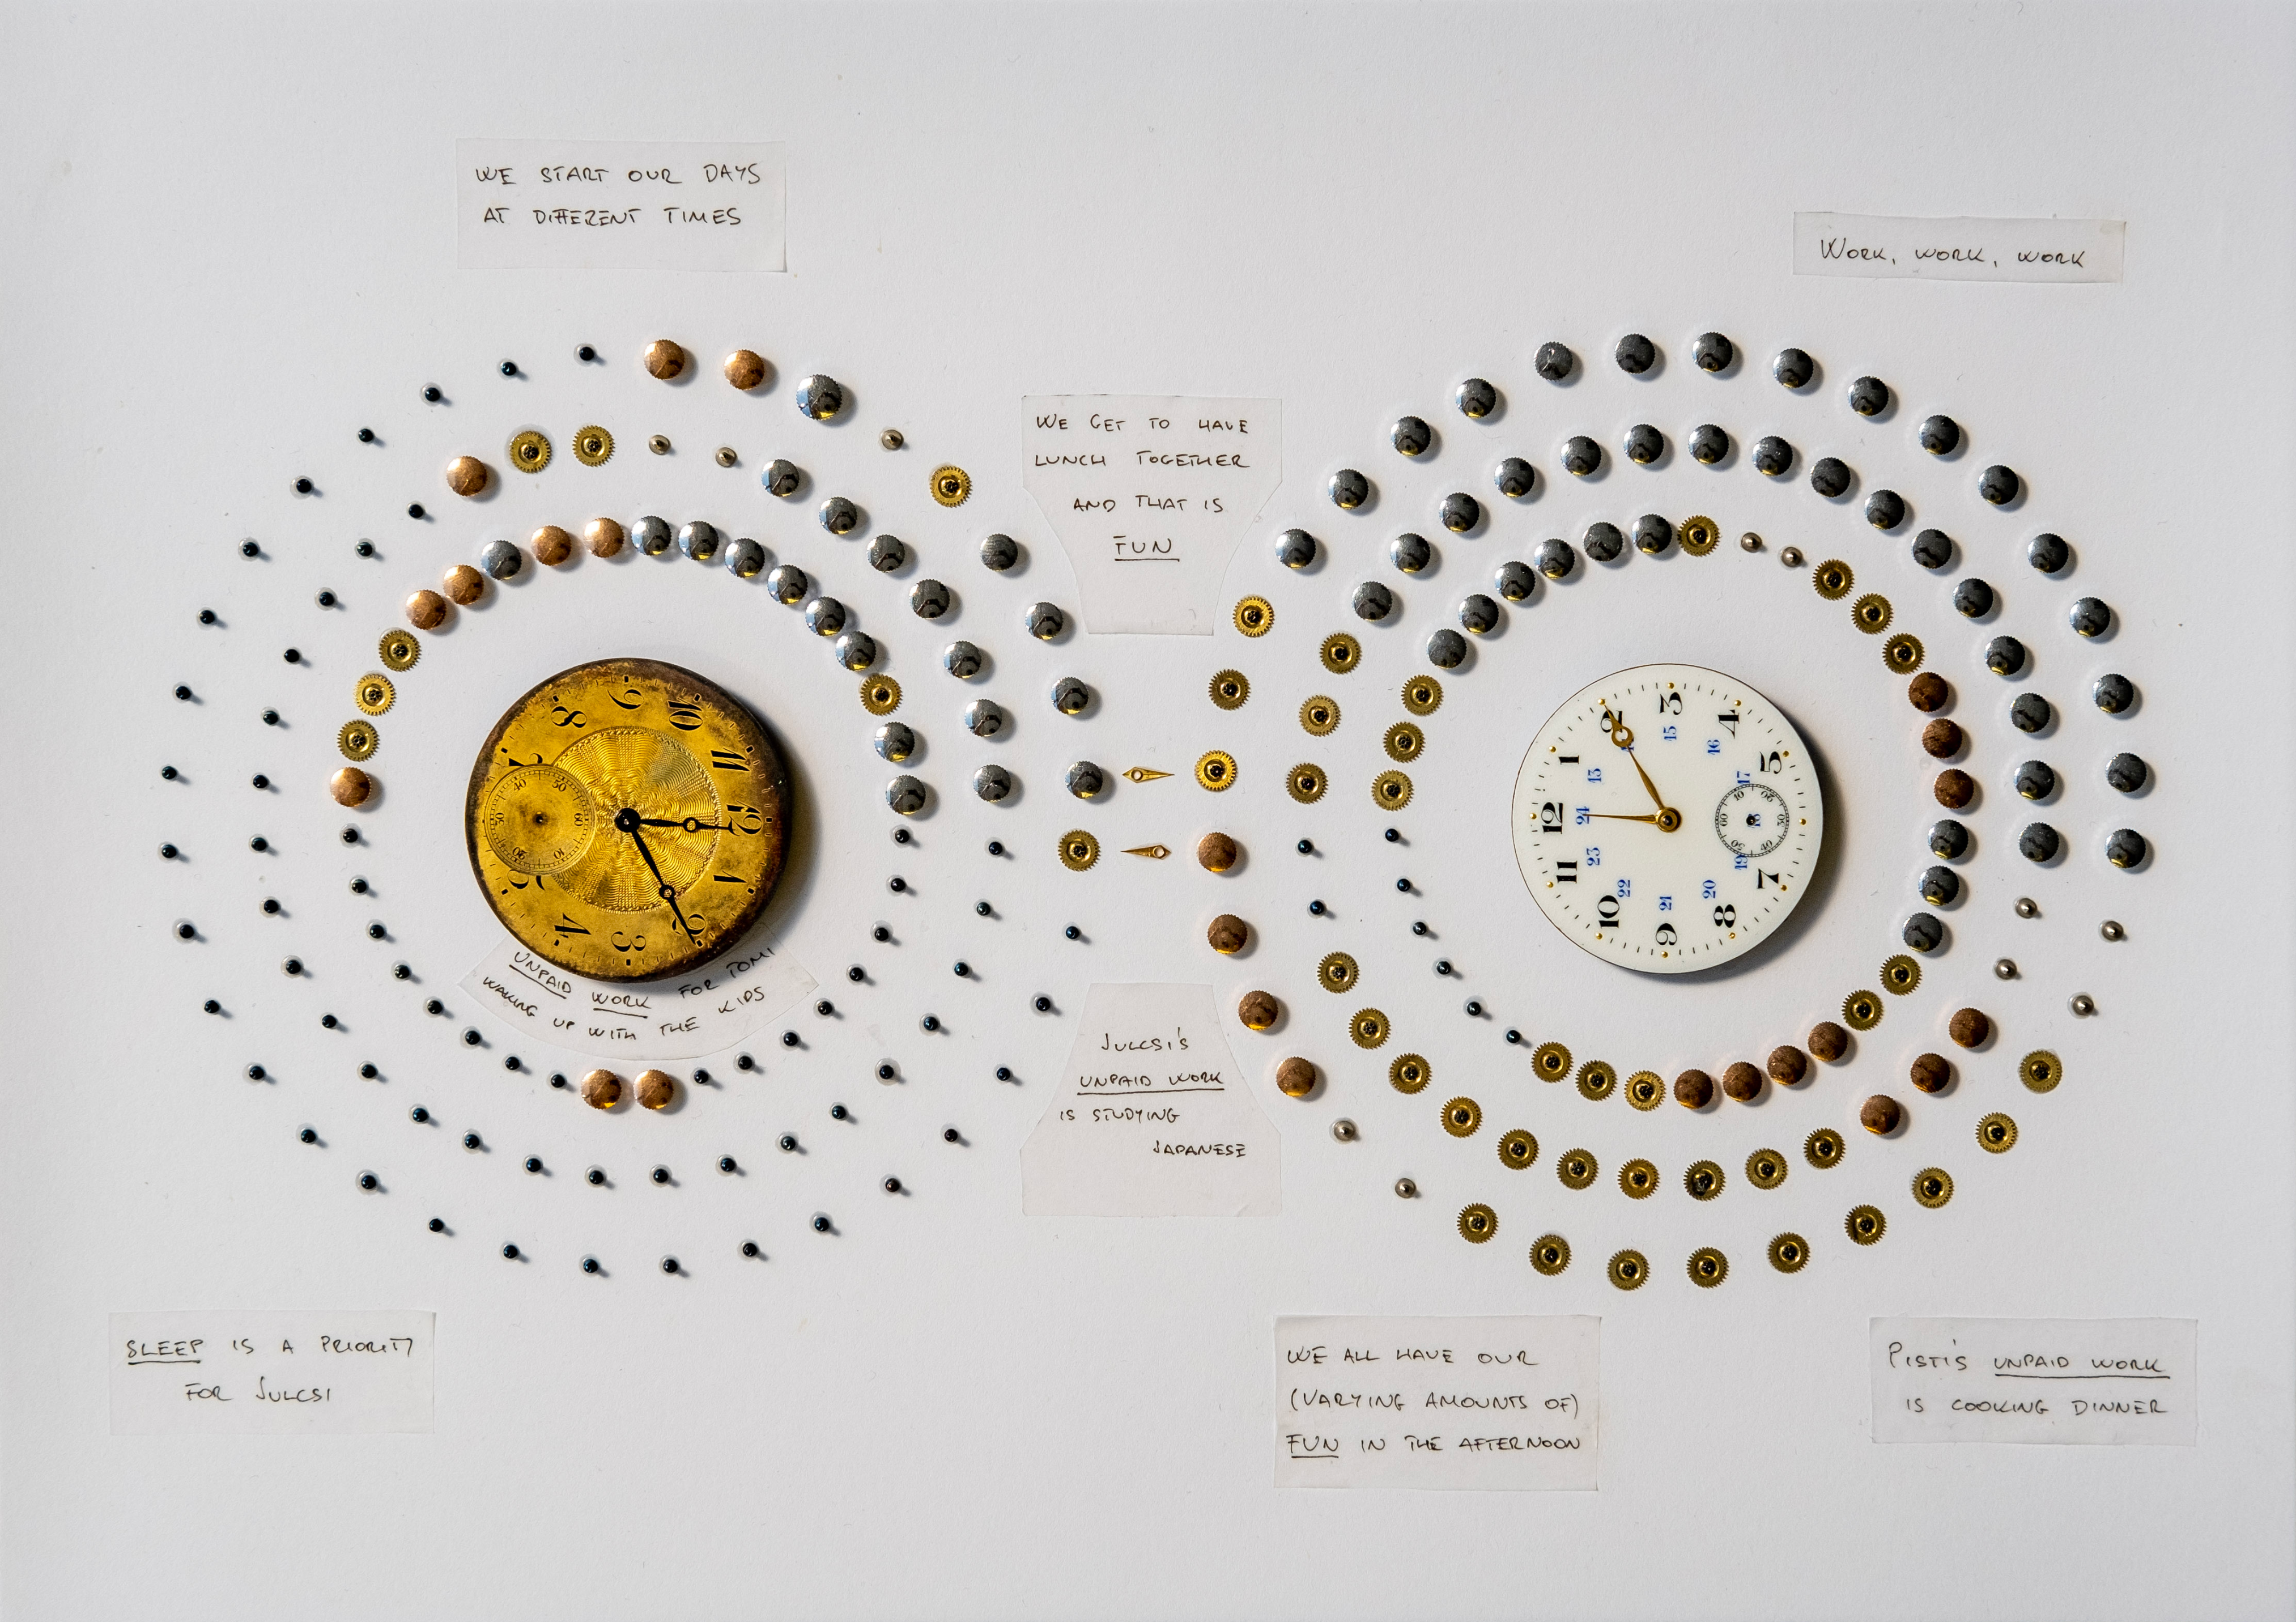 Overhead shot showing two watch faces situated to the left and right of the middle of a sheet of paper. Around both faces run three circles of five types of watch parts corresponding to different activities. Handwritten annotations help to discern the meaning of each part, highlighting differences between the authors’ days, like how “unpaid work” for Tomi means getting up at night for his children, while for Julcsi it’s studying Japanese and for Pisti it’s cooking.